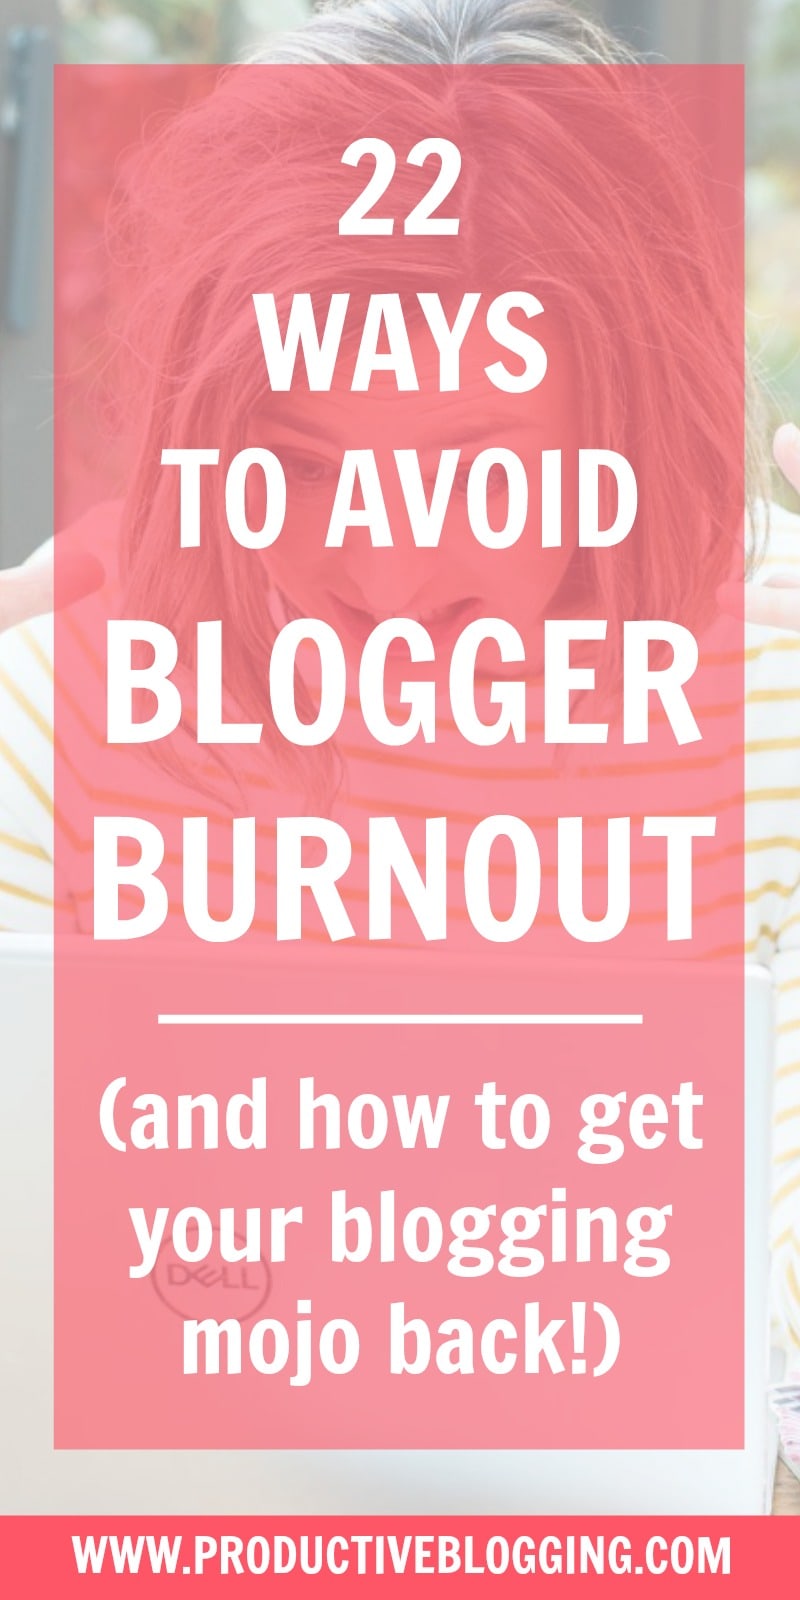 Blogger burnout is real. It can cause bloggers to lose focus and motivation, or even abandon blogging altogether. But the good news is, it can be easily avoided. Read my 22 ways to avoid blogger burnout and get your blogging mojo back! #bloggerburnout #bloggingmojo #stress #burnout #overwhelm #focus #motivation #blogginglife #bloggers #productiveblogging #productivity #productivitytips #productivityhacks #productivityhabits #bloggingtips #blogginghacks #blogsmarter #blogsmarternotharder #BSNH